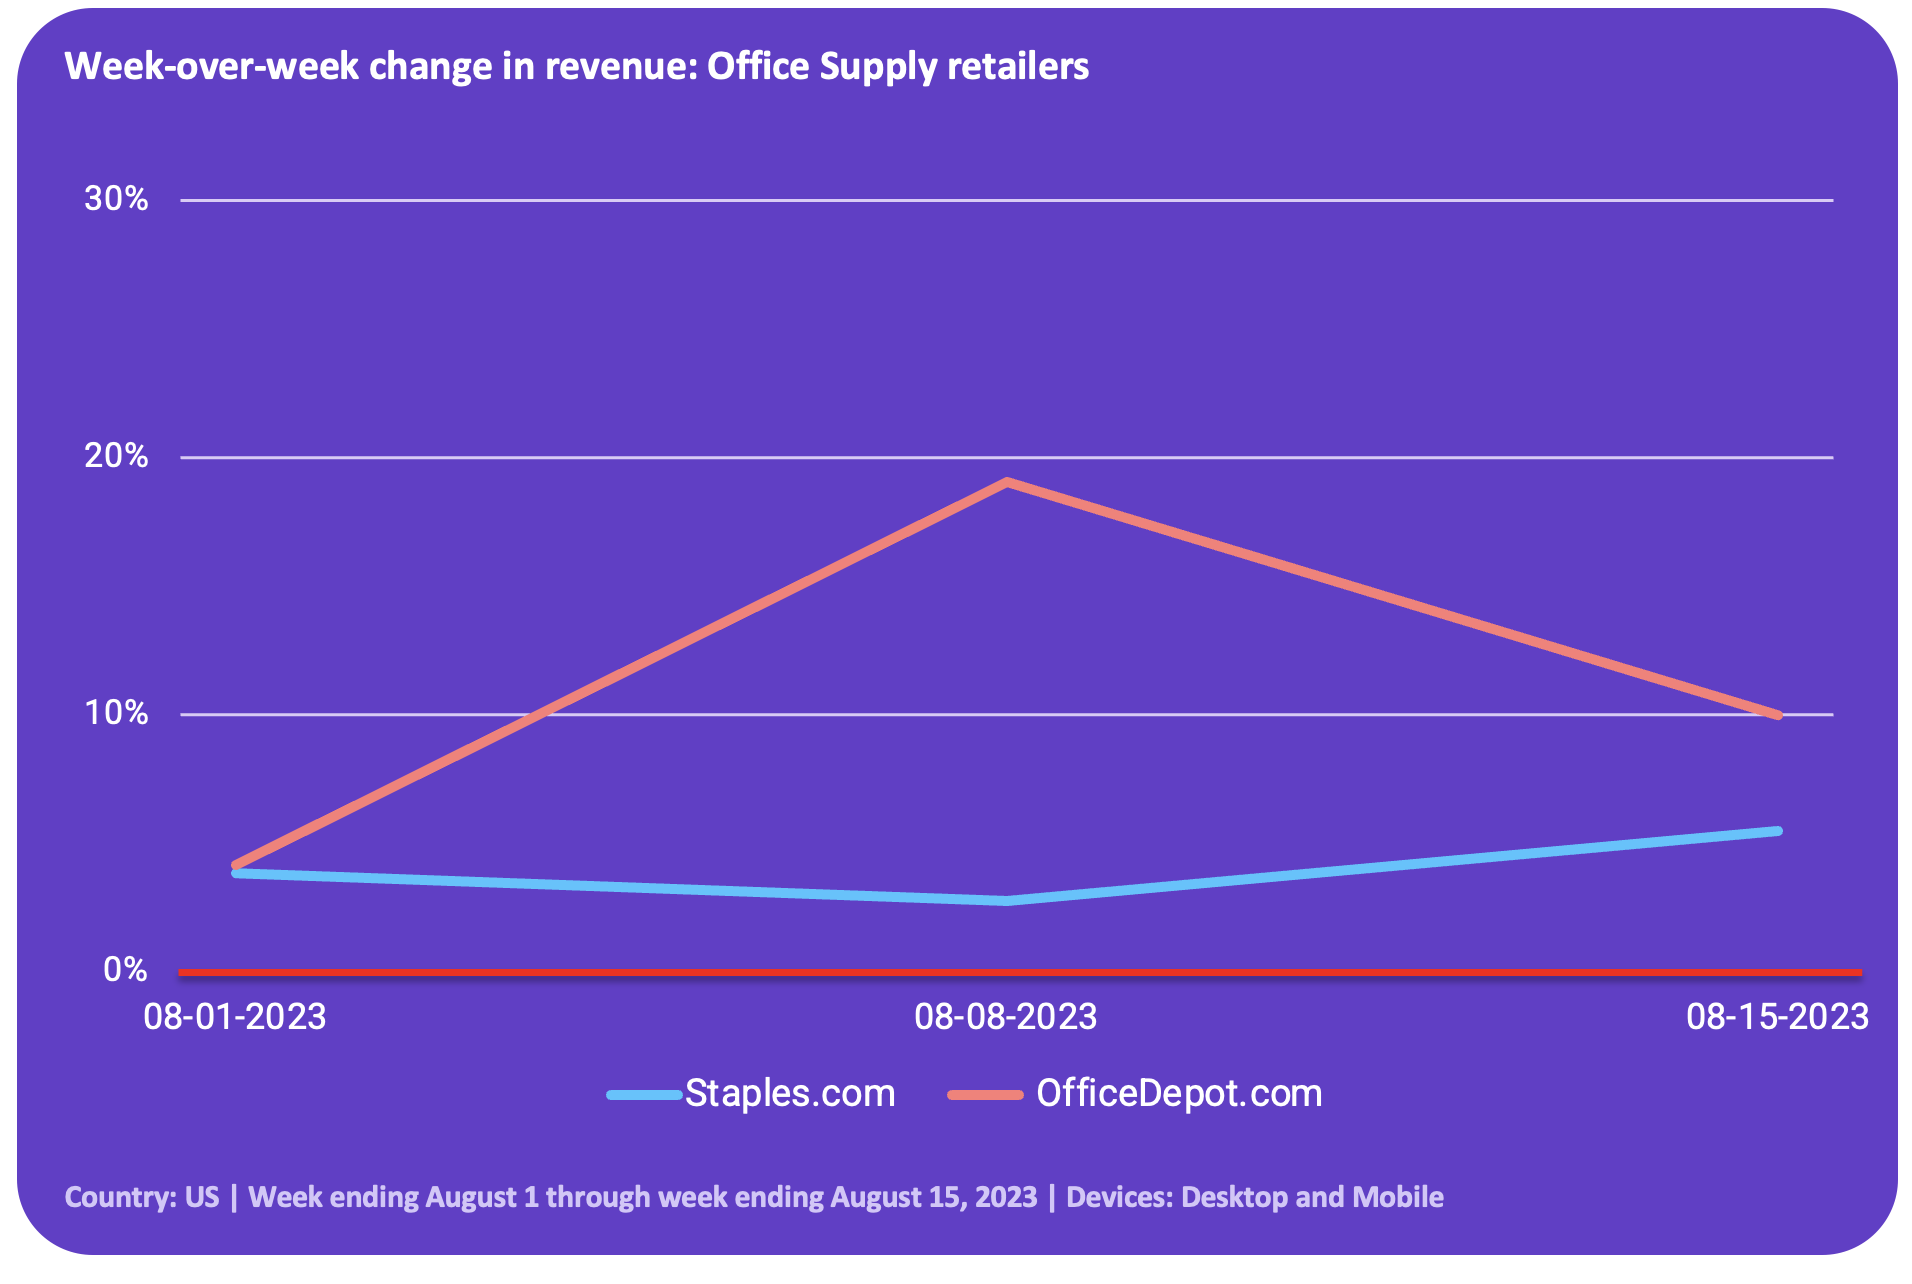 Week over week change in e-commerce revenue for leading US office supply sites